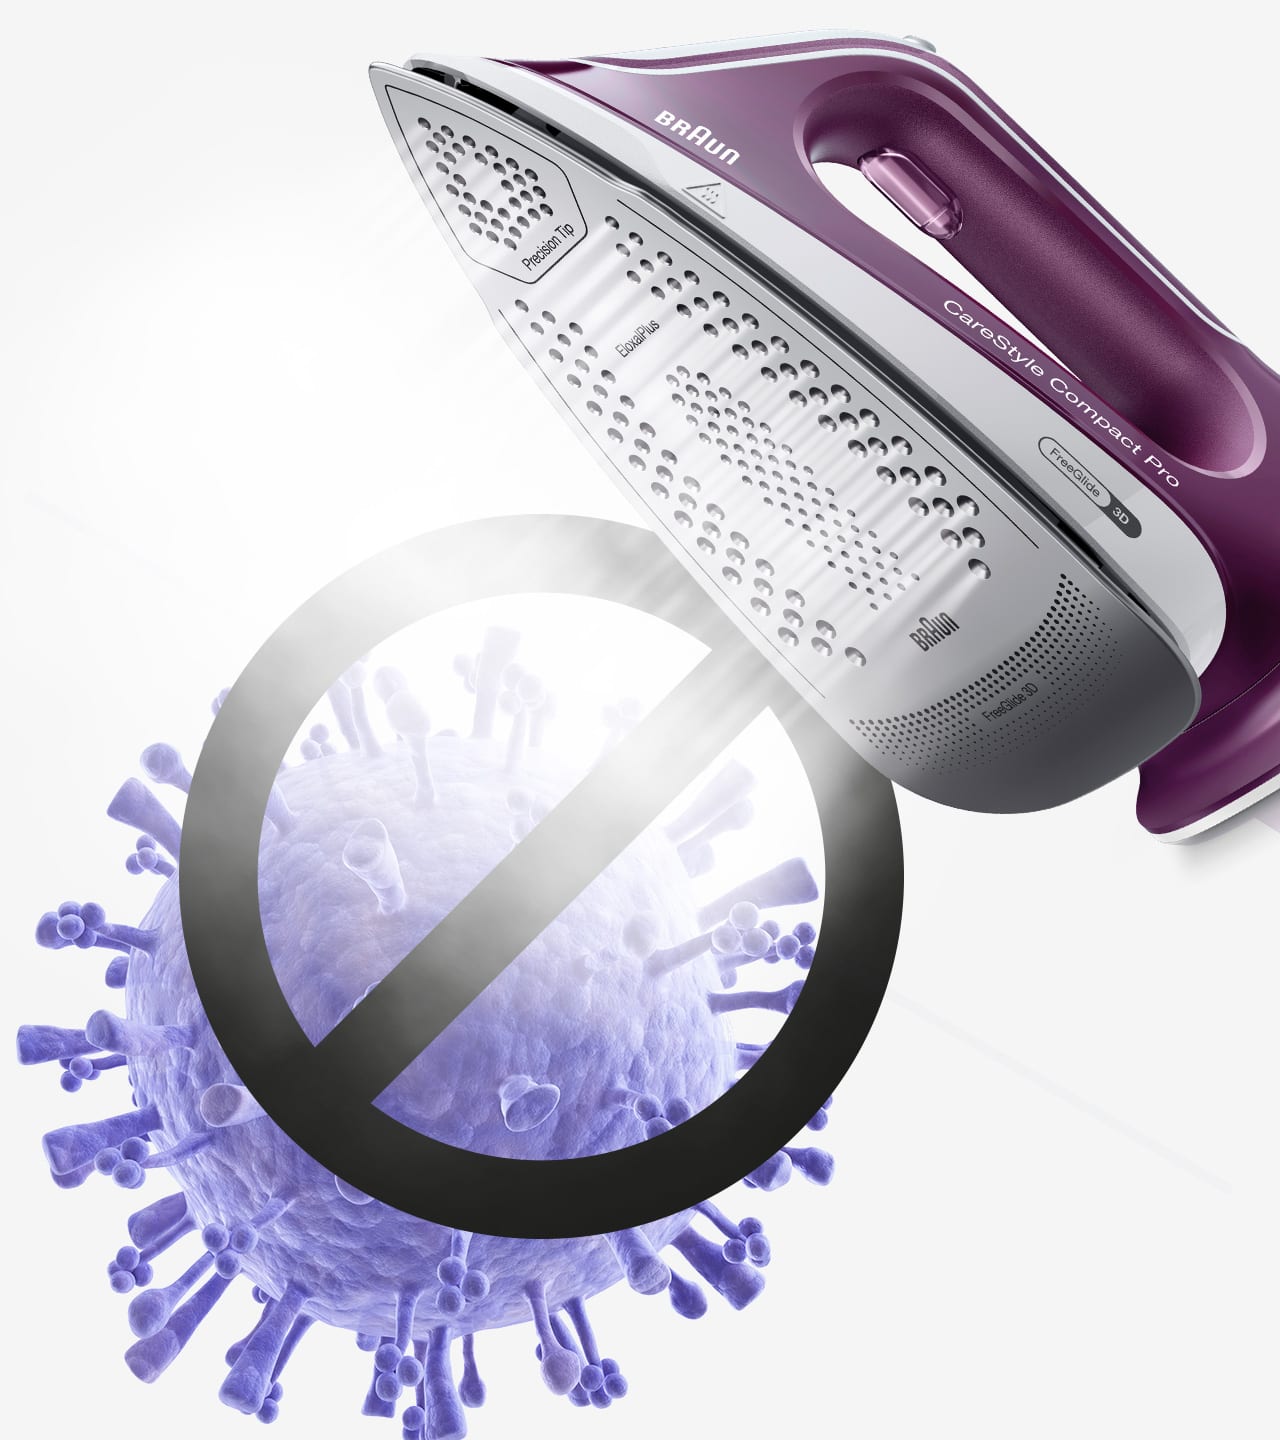 Reduce the spread of Pathogens in and on textiles by ironing with CareStyle